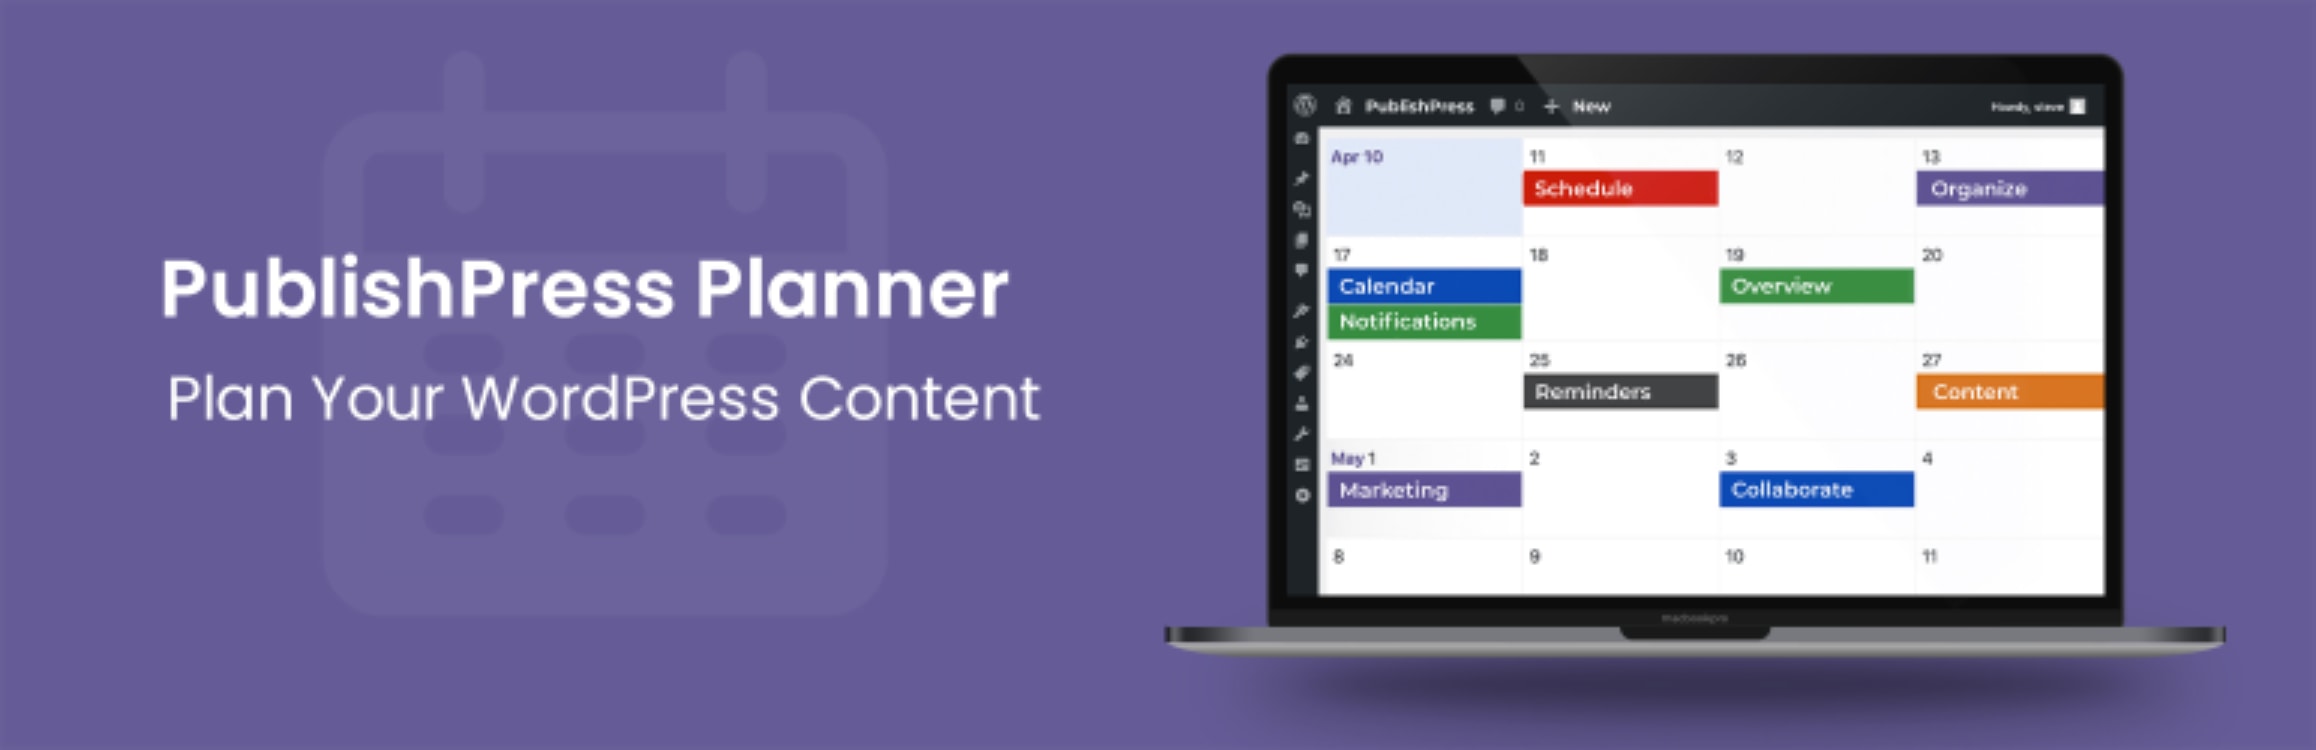 Editorial Calendar And Marketing Content Overview – PublishPress Planner Preview Wordpress Plugin - Rating, Reviews, Demo & Download